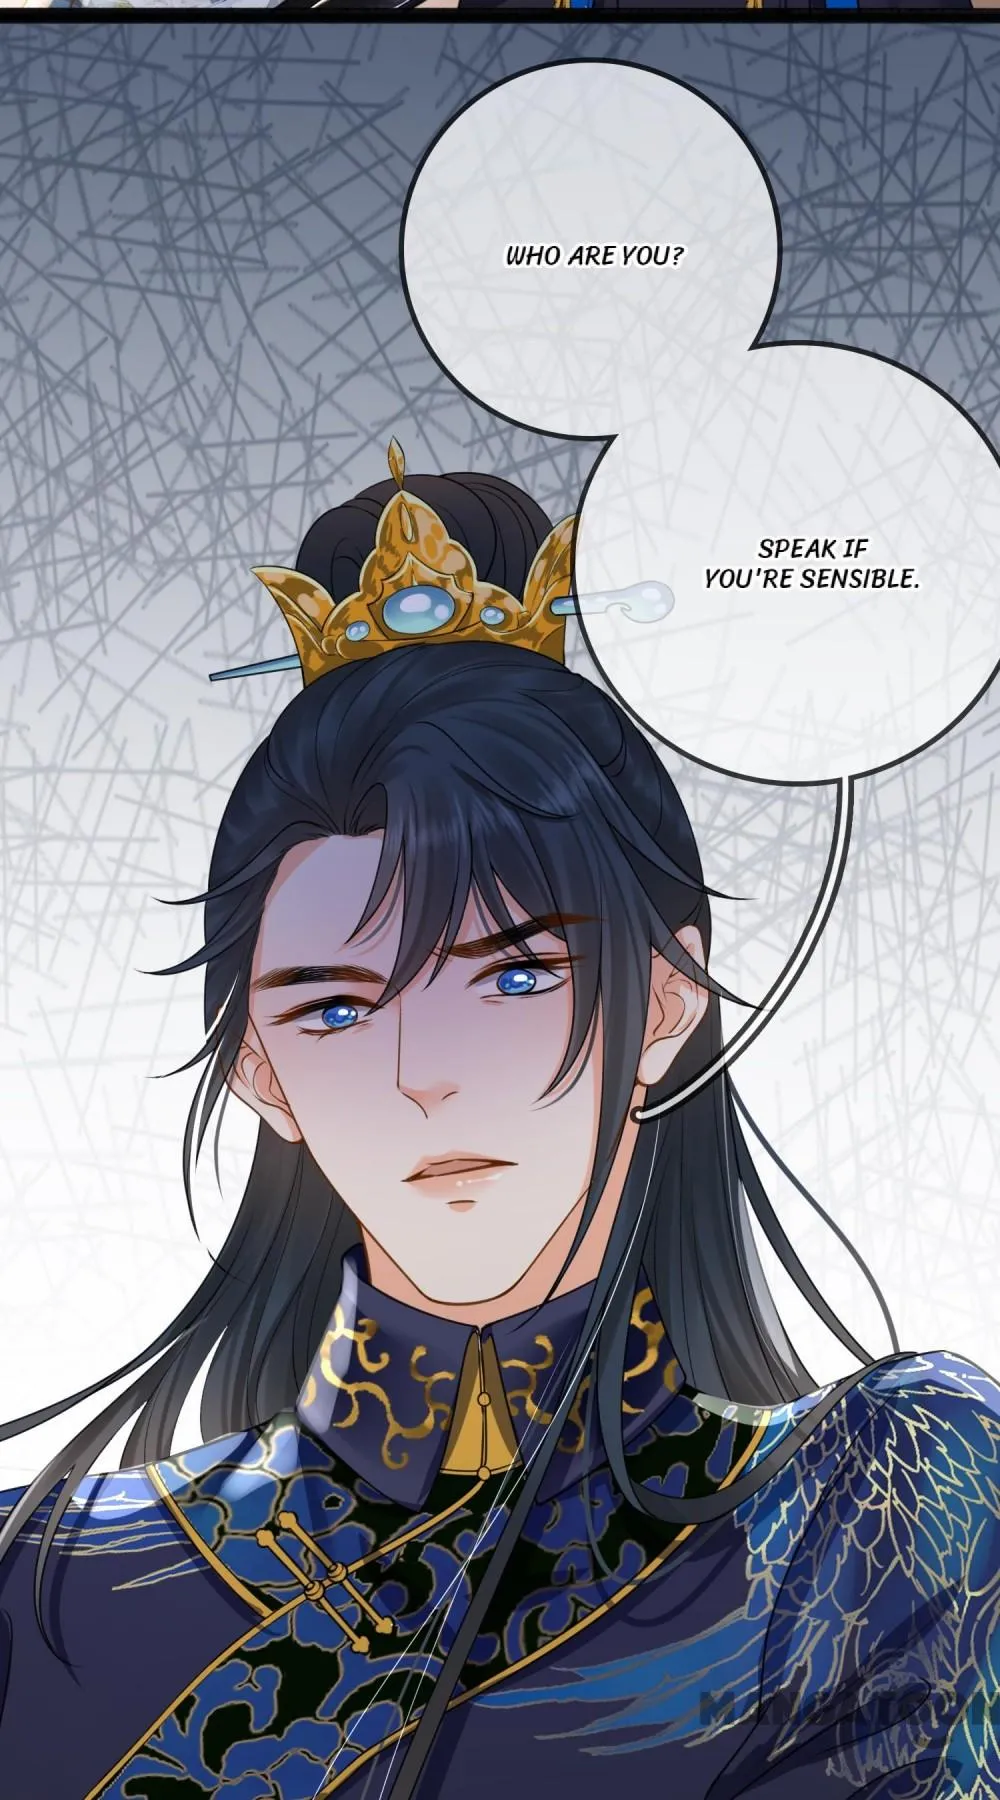 Your Highness, Enchanted By Me! chapter 29